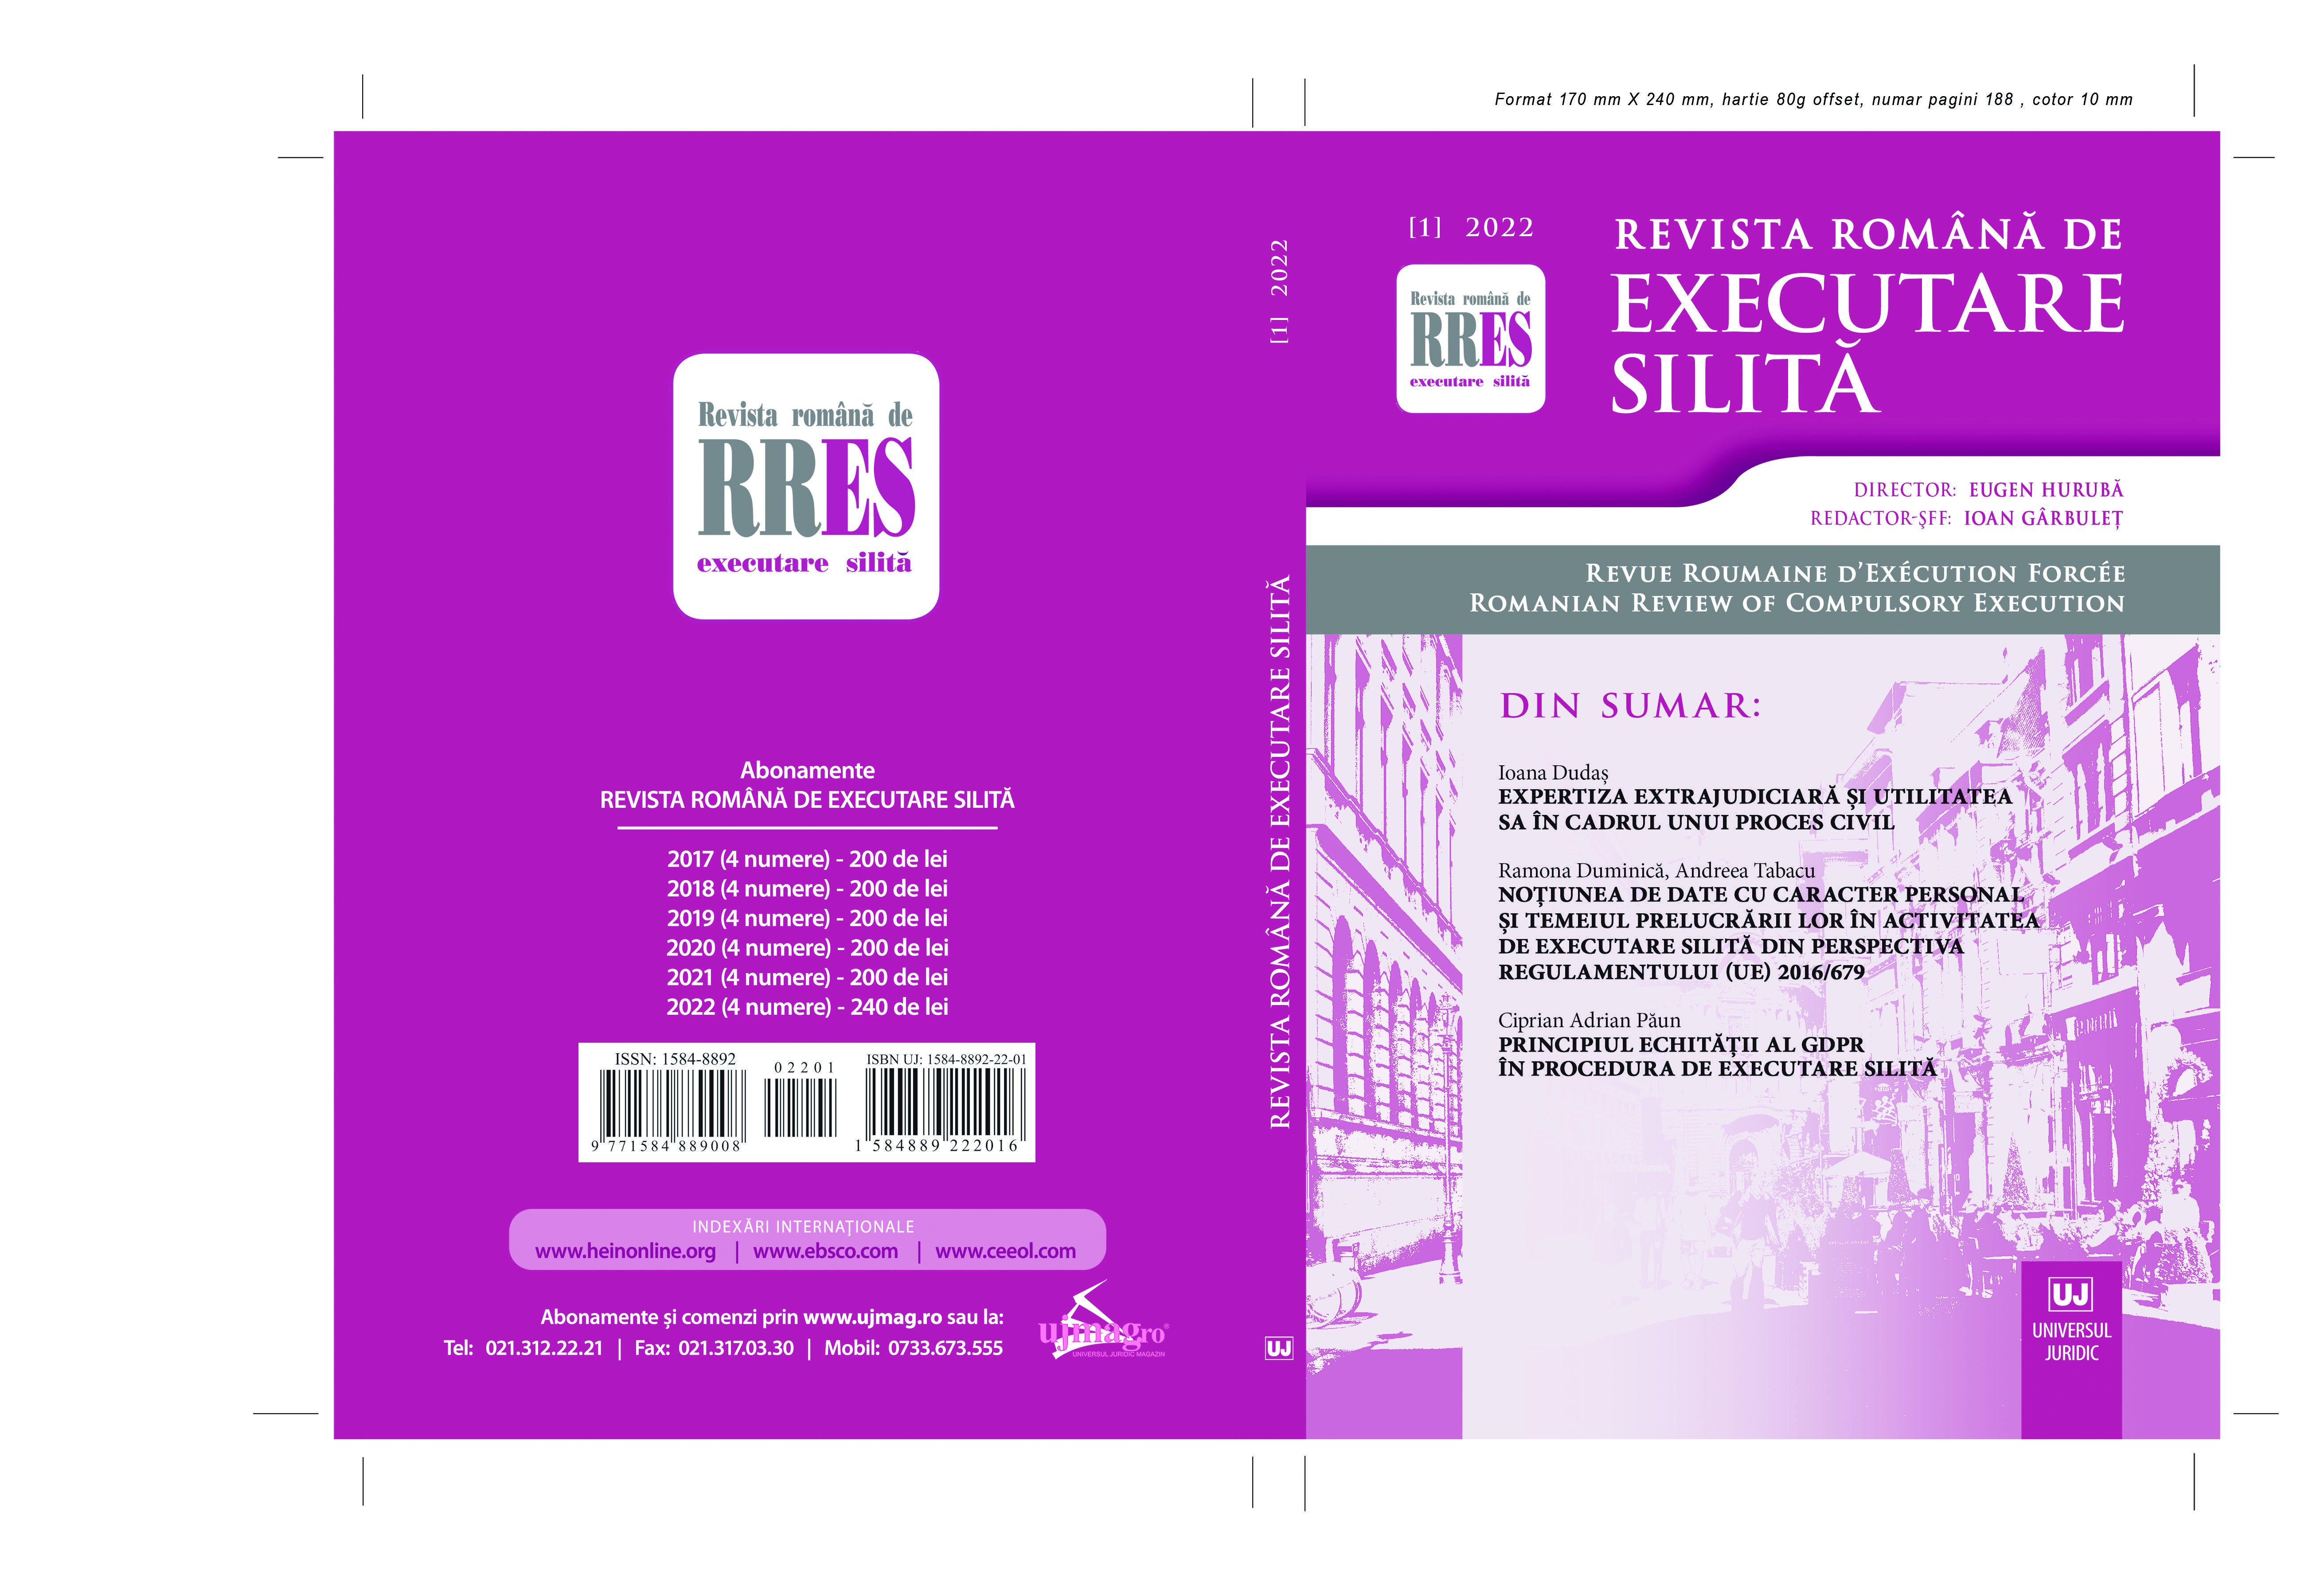 Extrajudicial expertise and its utility within a civil process Cover Image